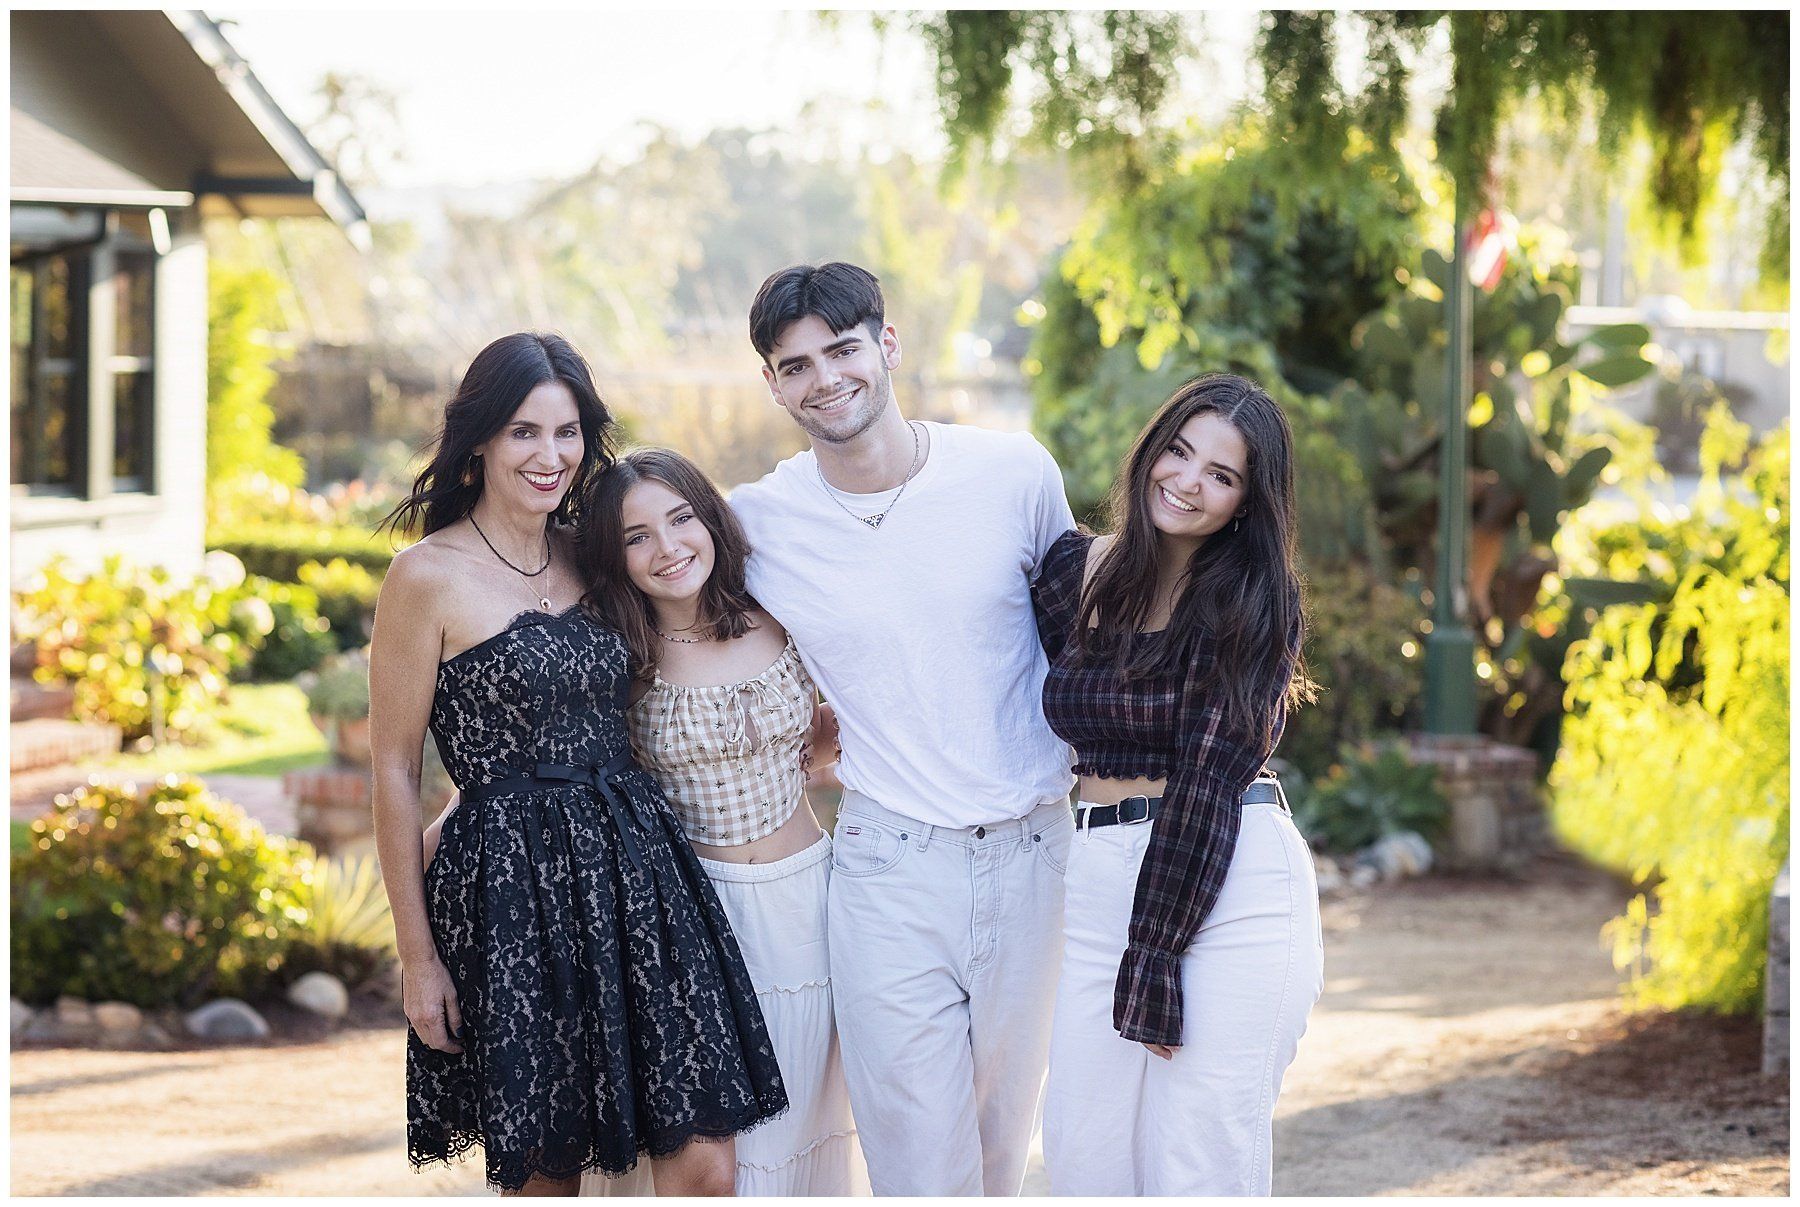 Lifestyle family portraits in Old town San Juan Capistrano.  Wearing neutral colors and black